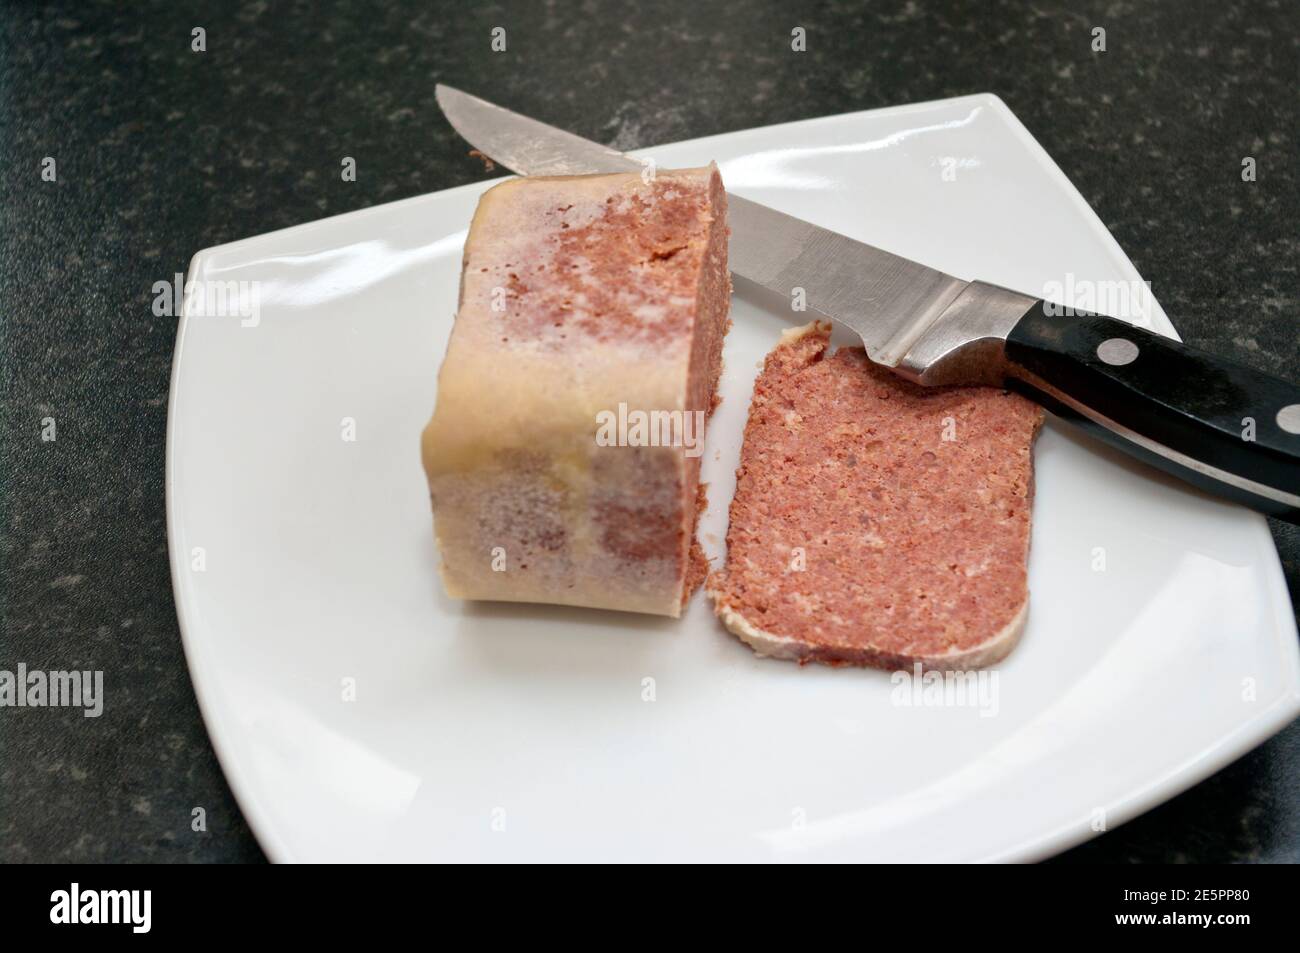 Sliced Corned Beef On a White Plate With a Knife Stock Photo